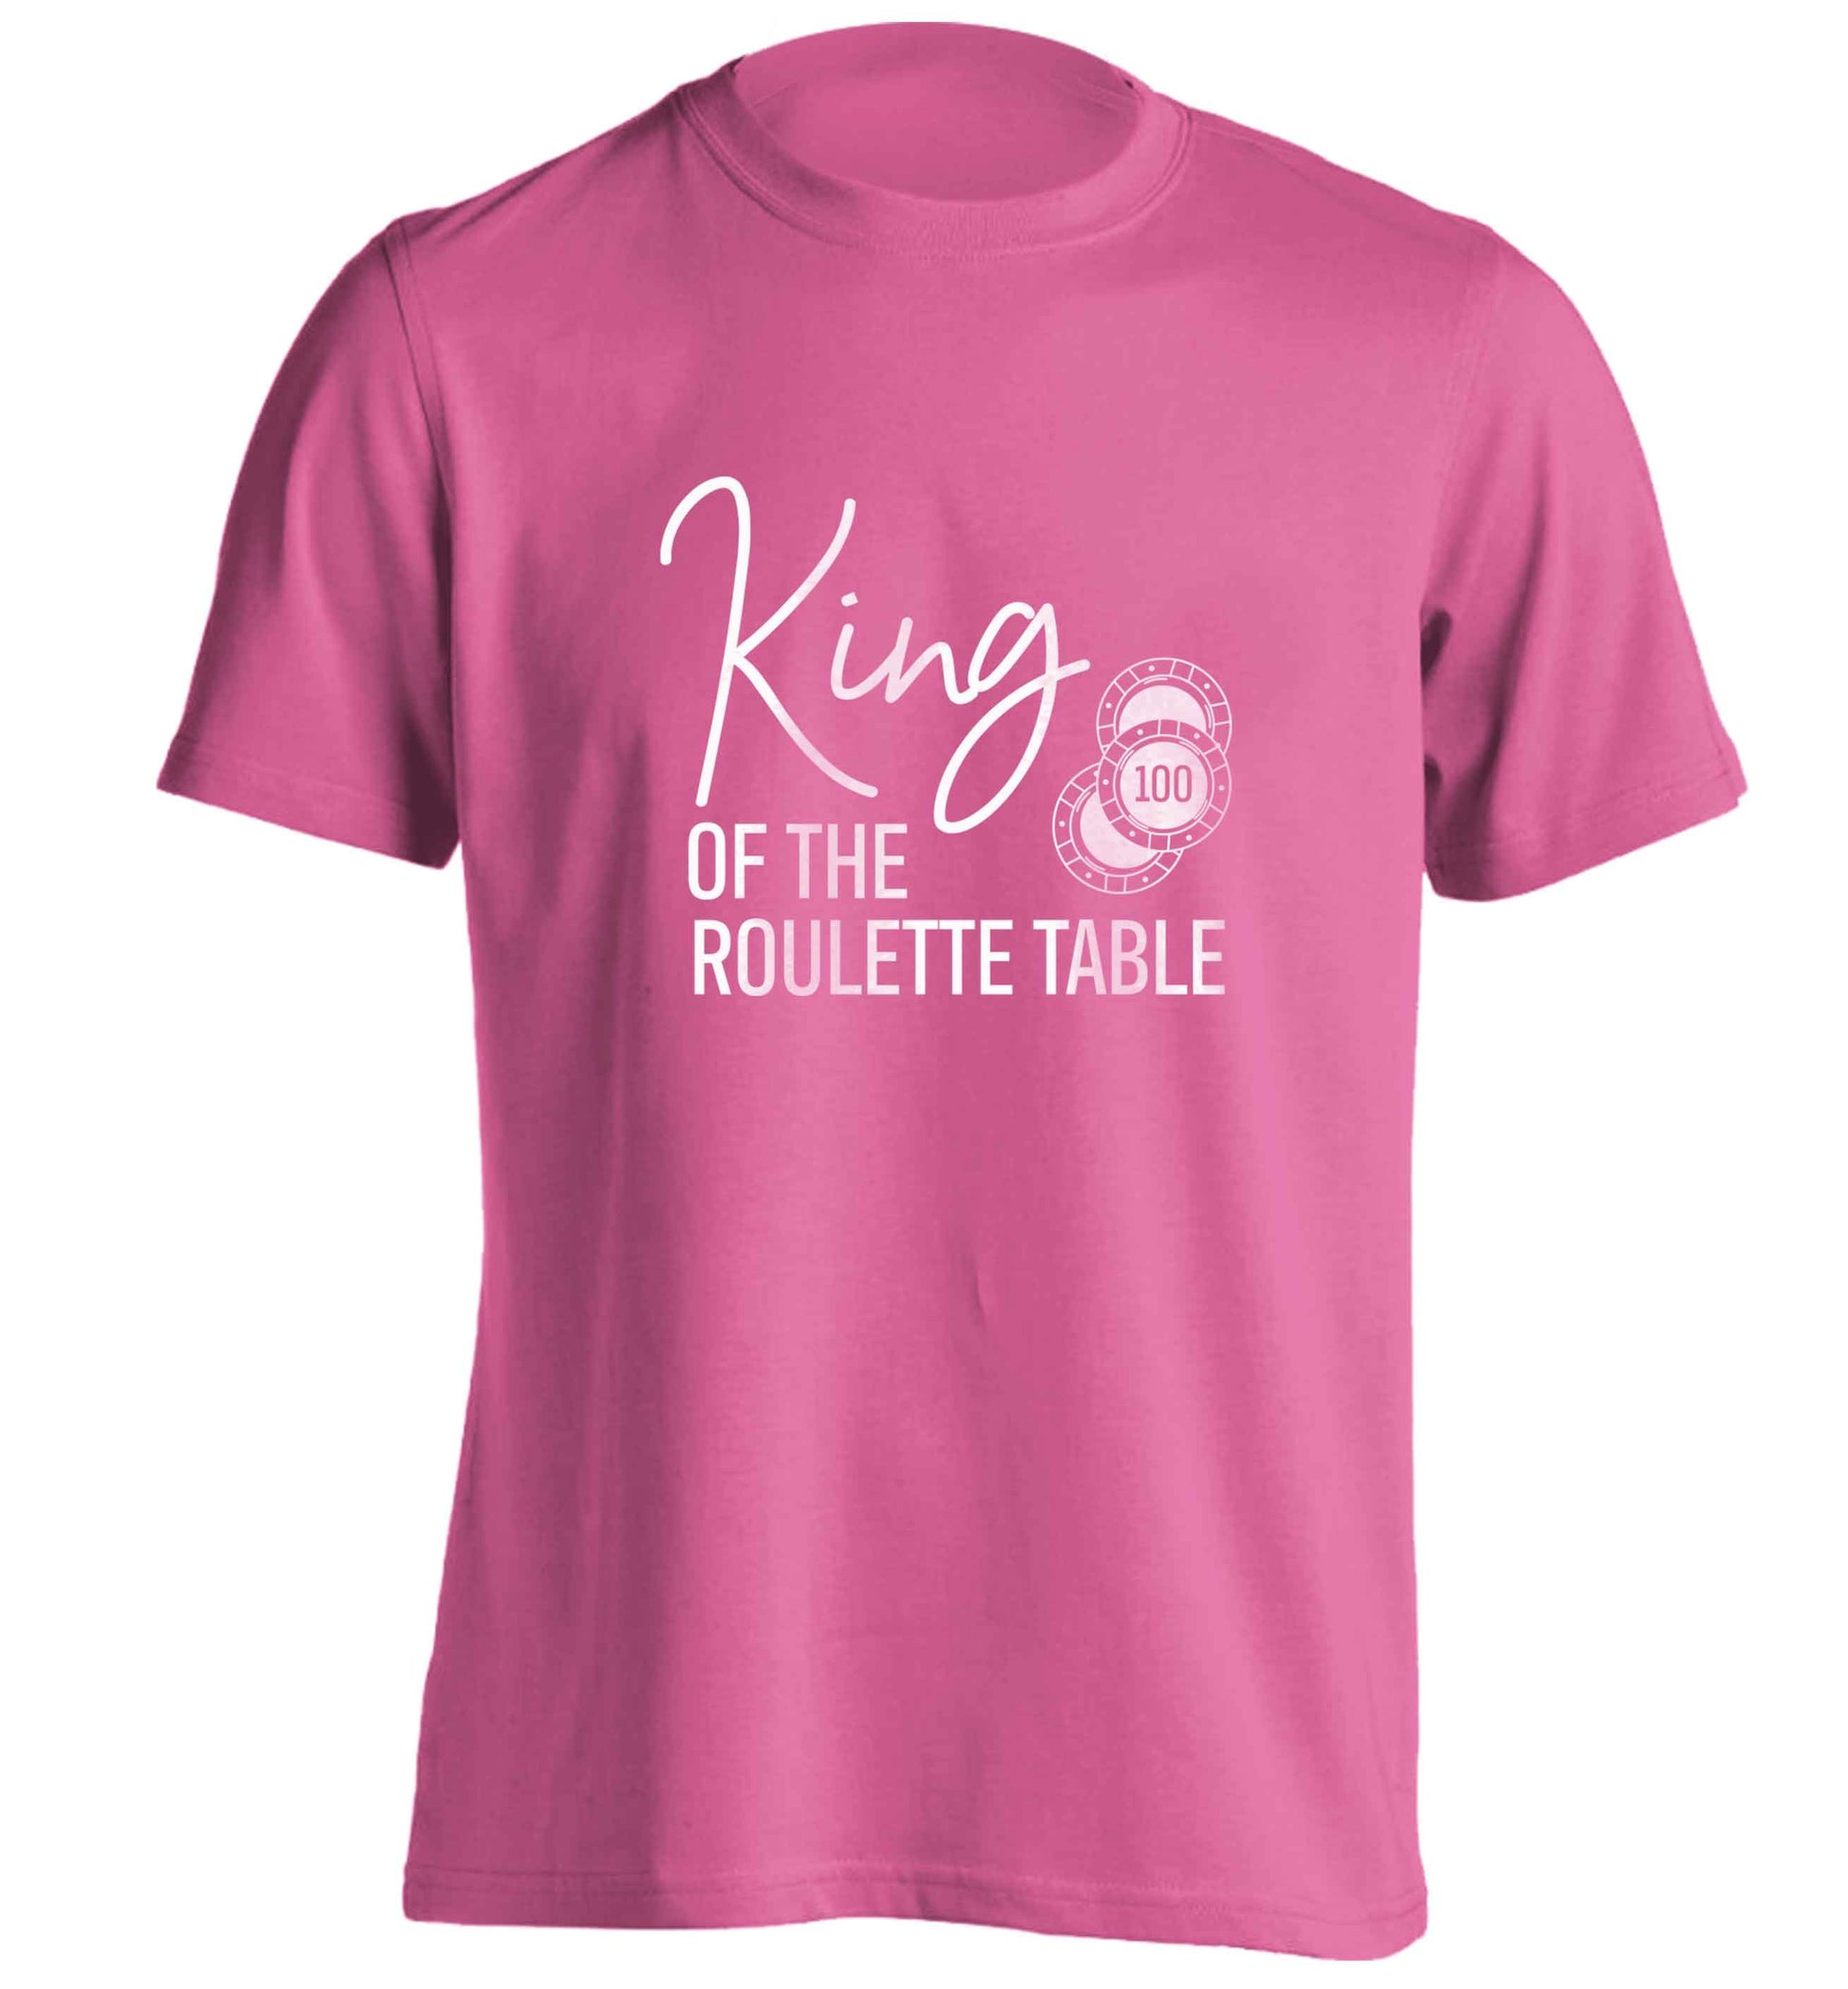 King of the roulette table adults unisex pink Tshirt 2XL